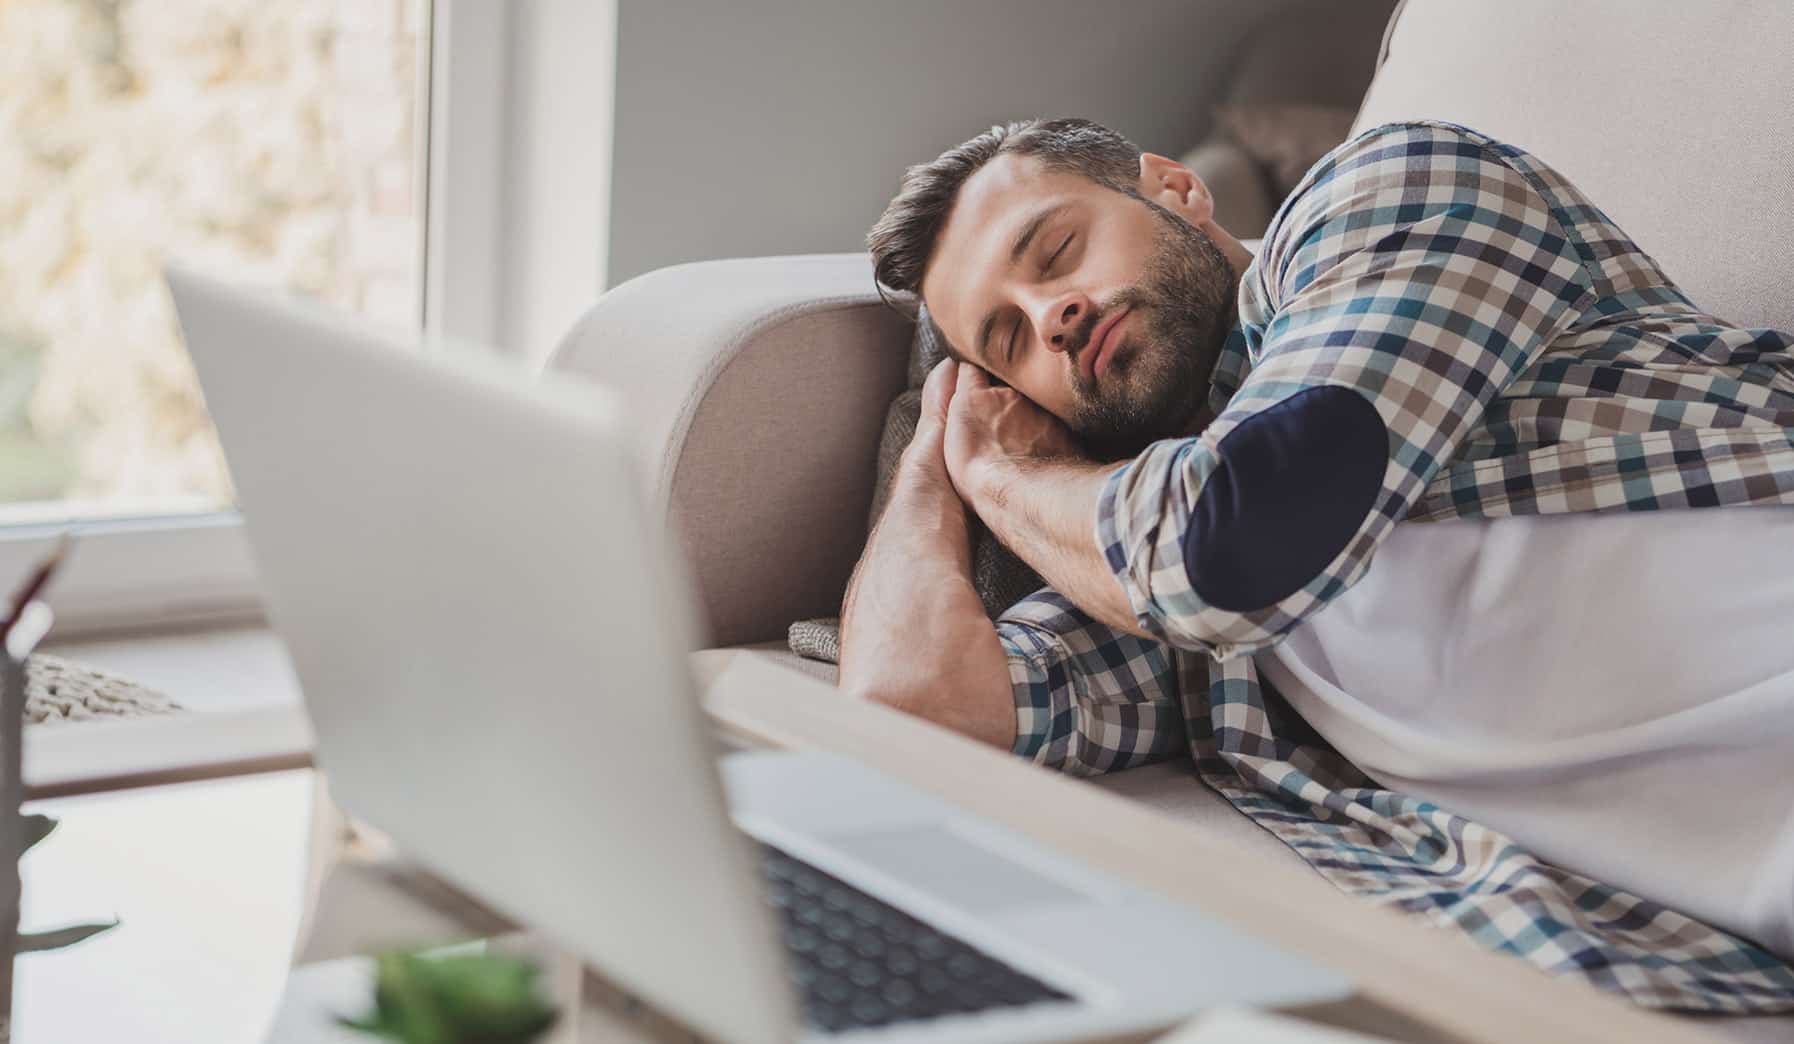 Discover the benefits of afternoon power naps and sleeping at work during the day.